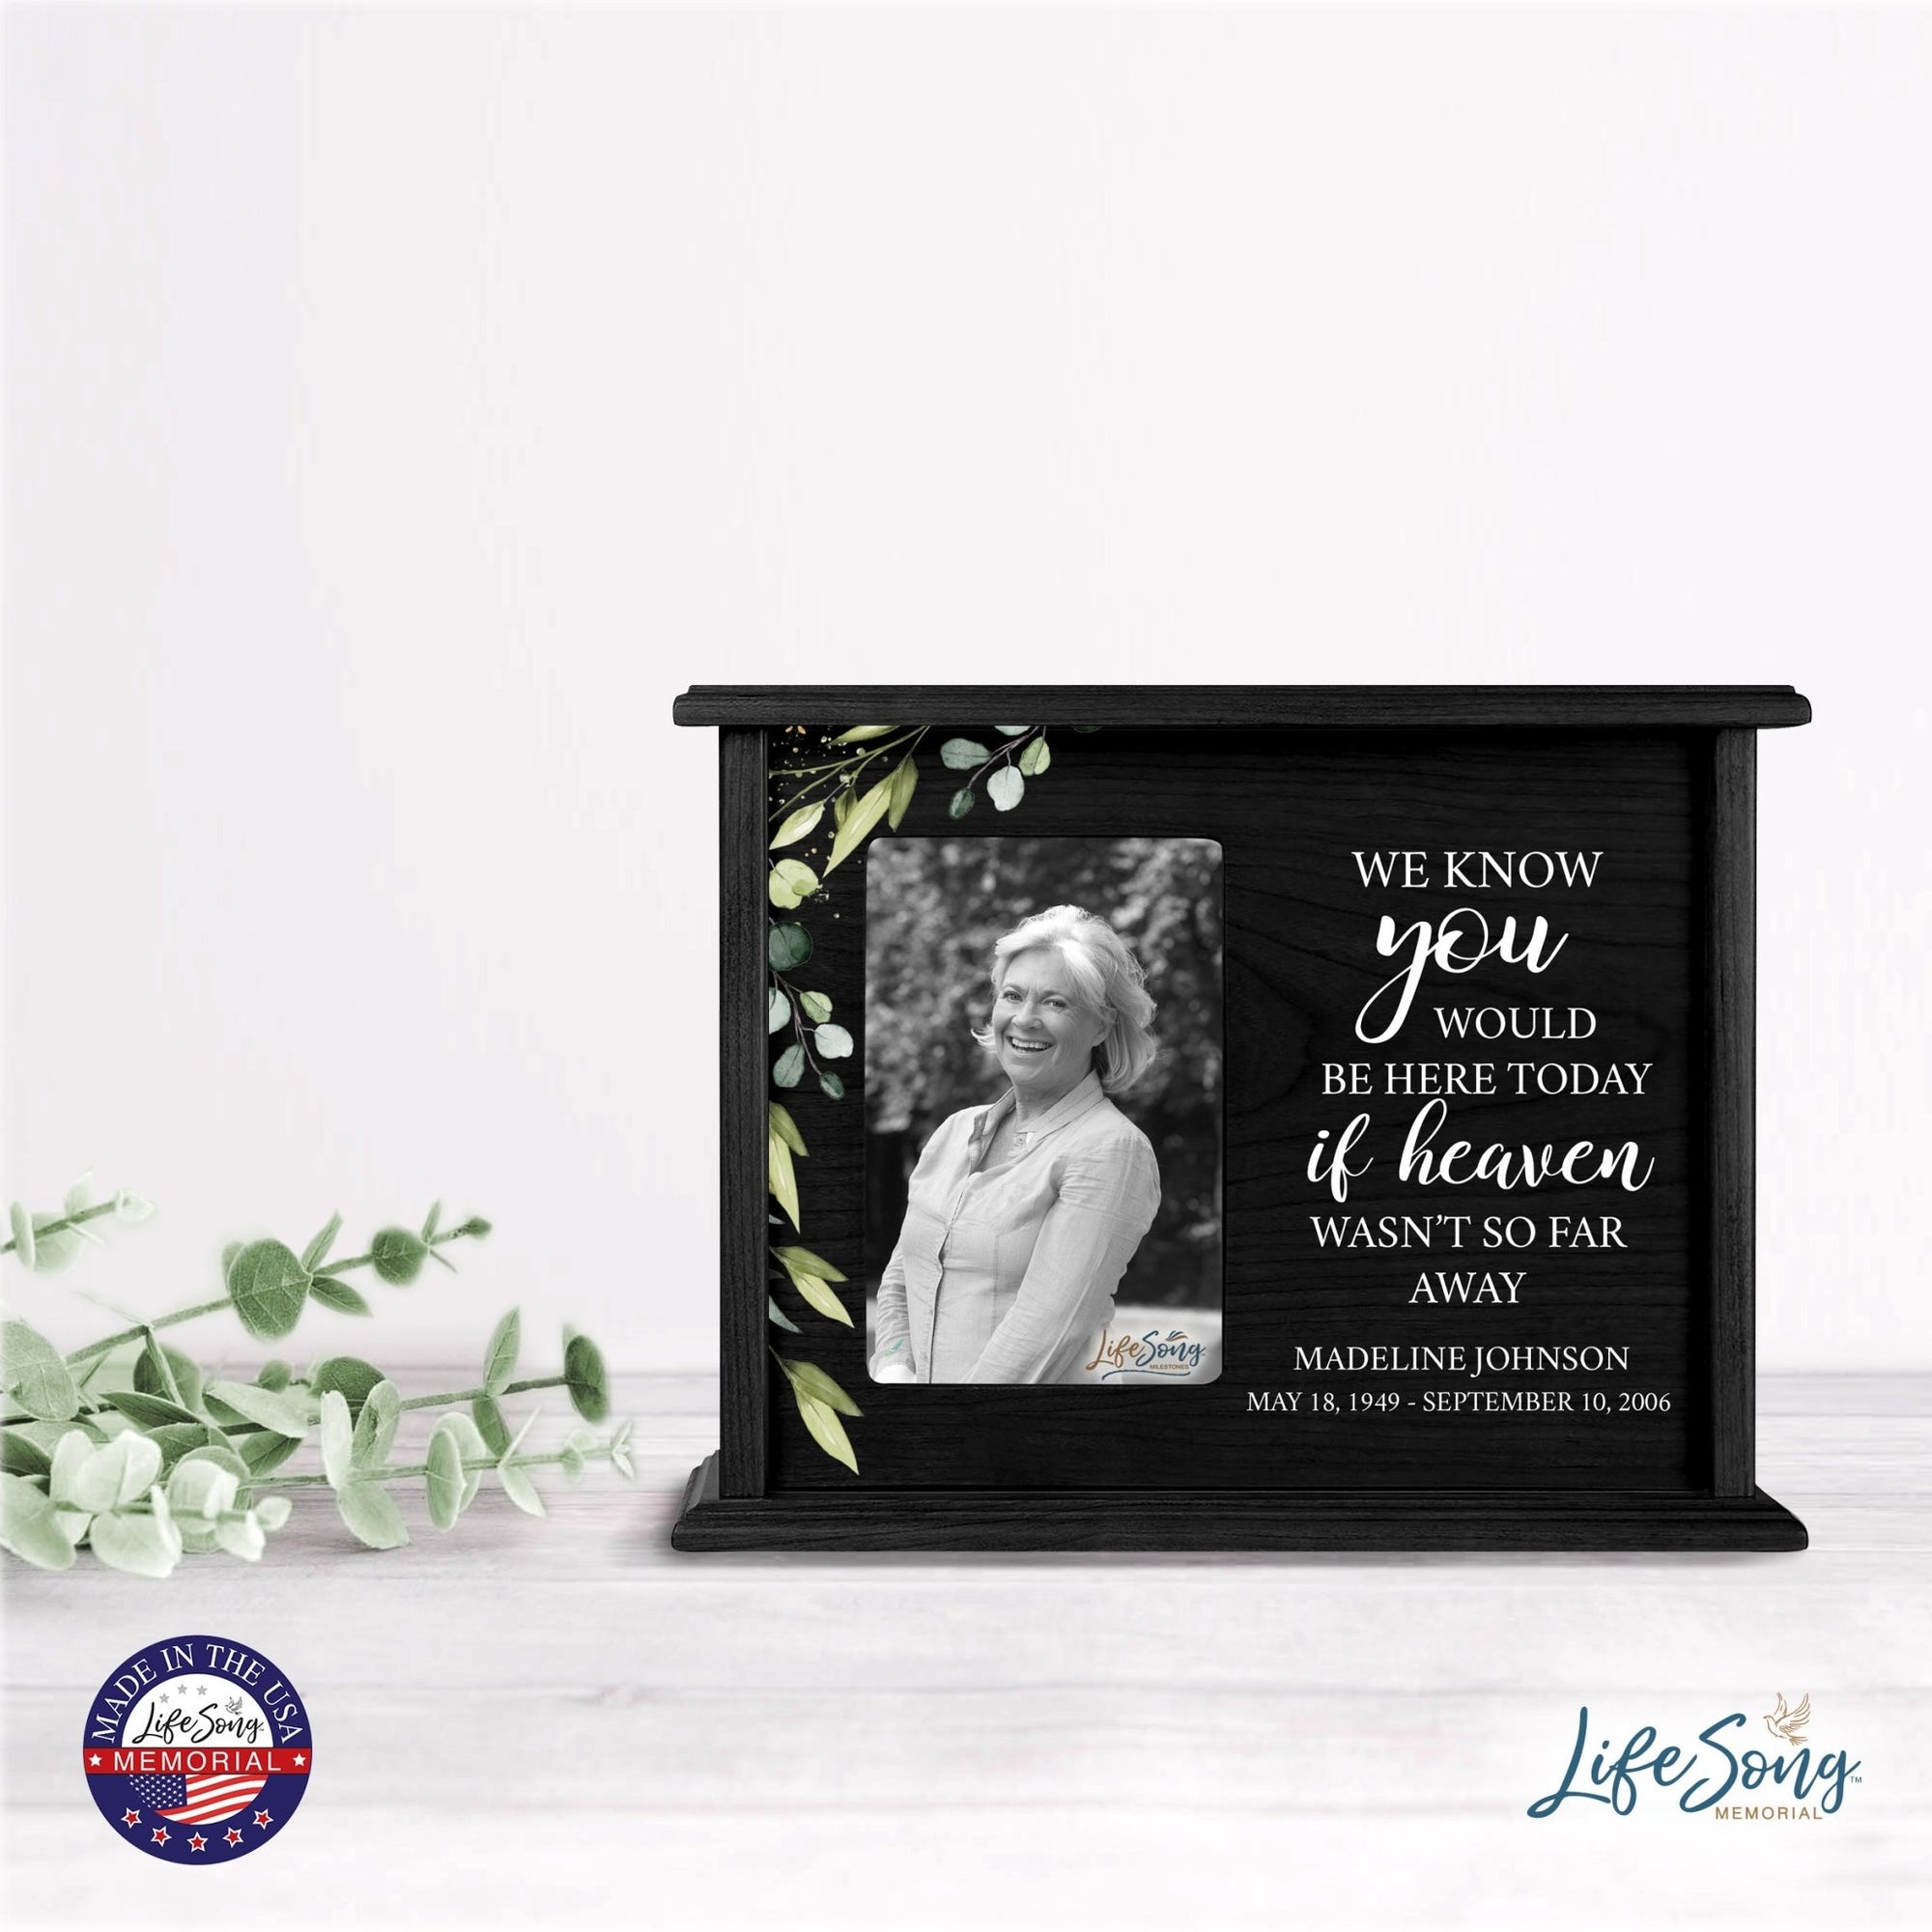 Personalized Memorial Cherry Wood 12 x 4.5 x 9 Cremation Urn Box with Picture Frame holds 200 cu in of Human Ashes and 4x6 Photo - We Know You Would - LifeSong Milestones